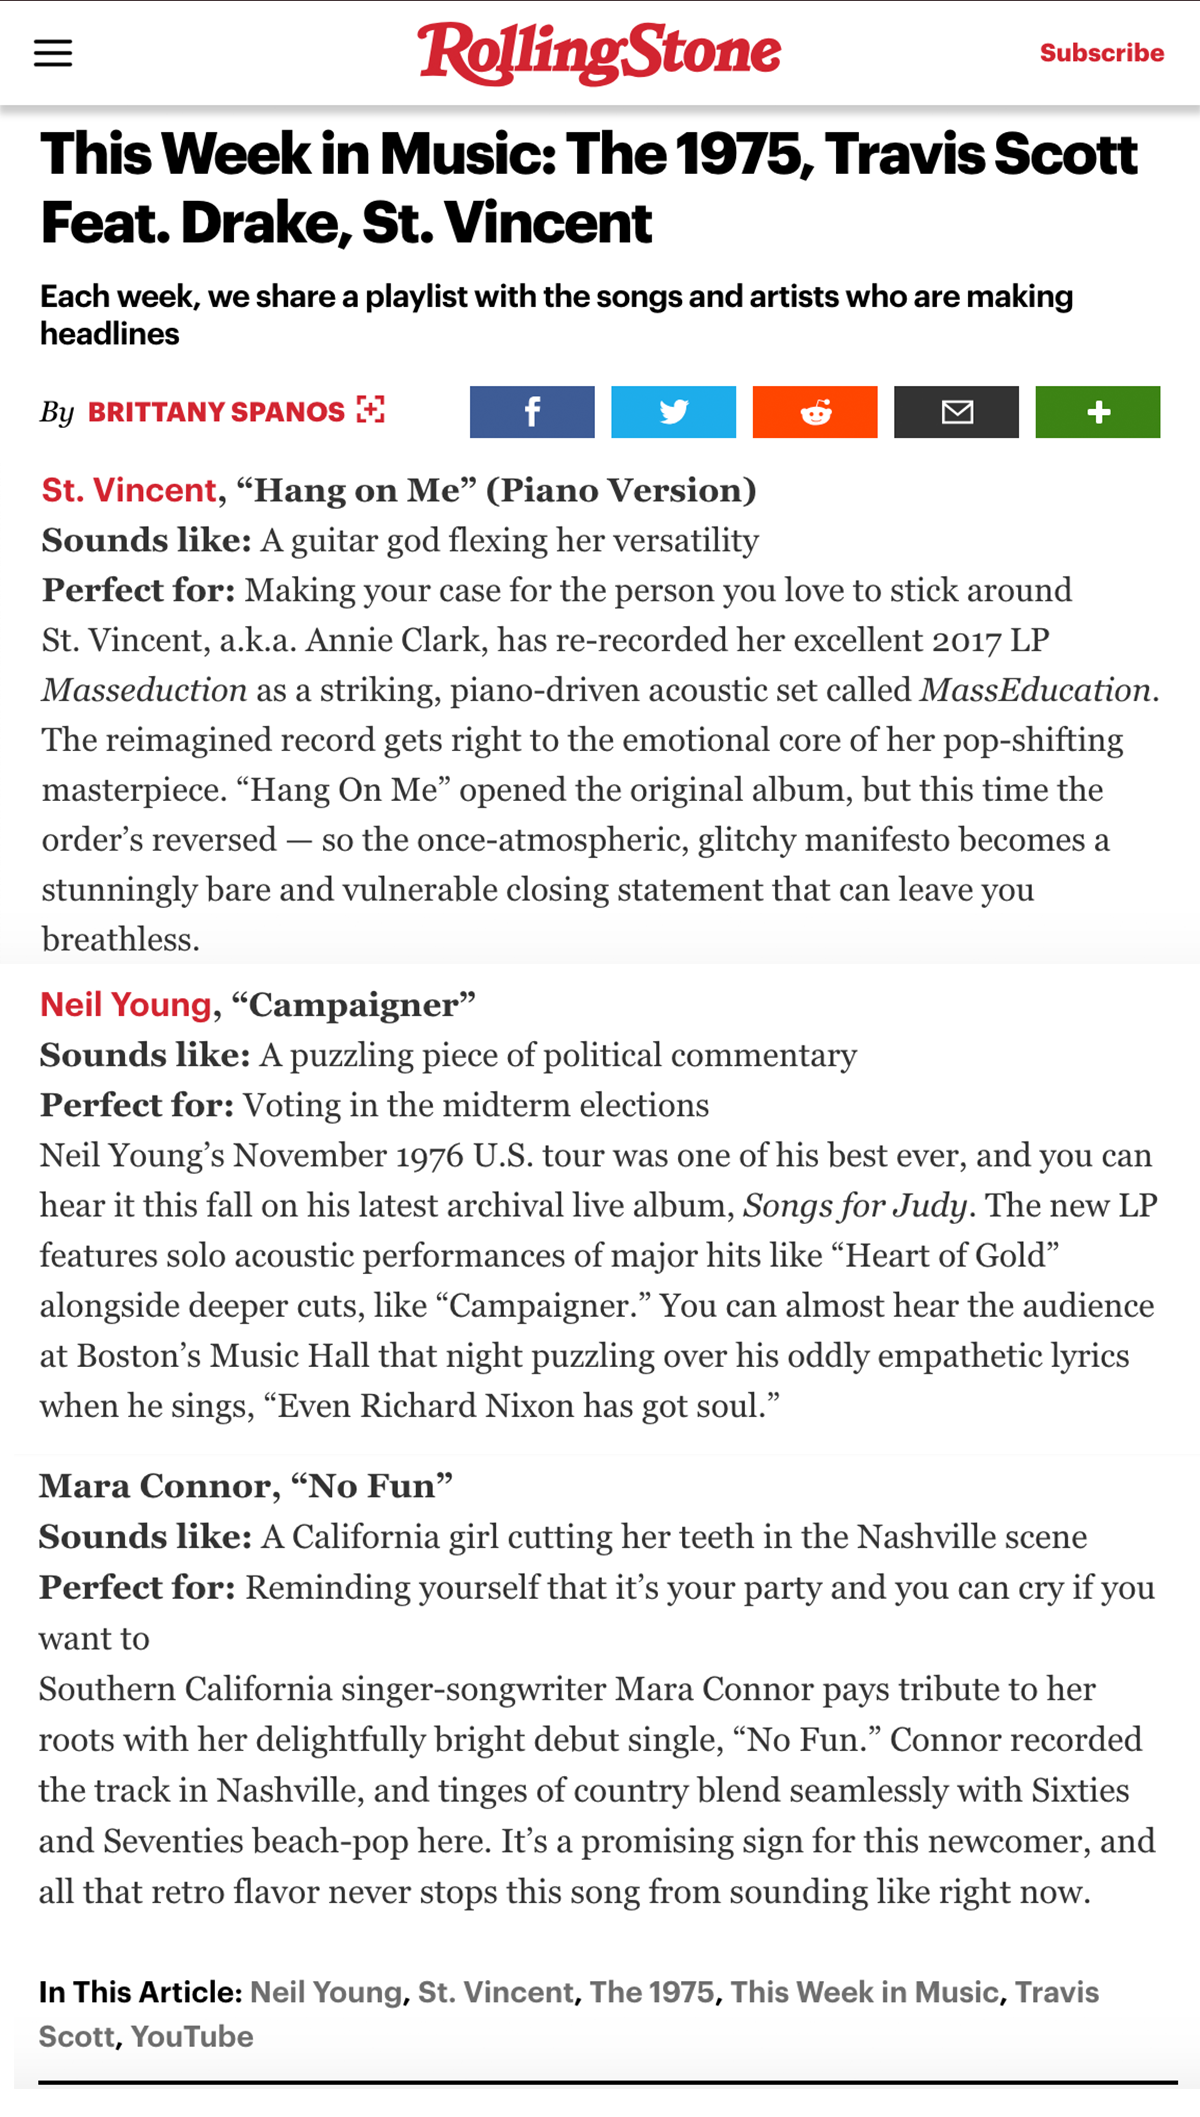 Rolling Stone This Week in Music.png